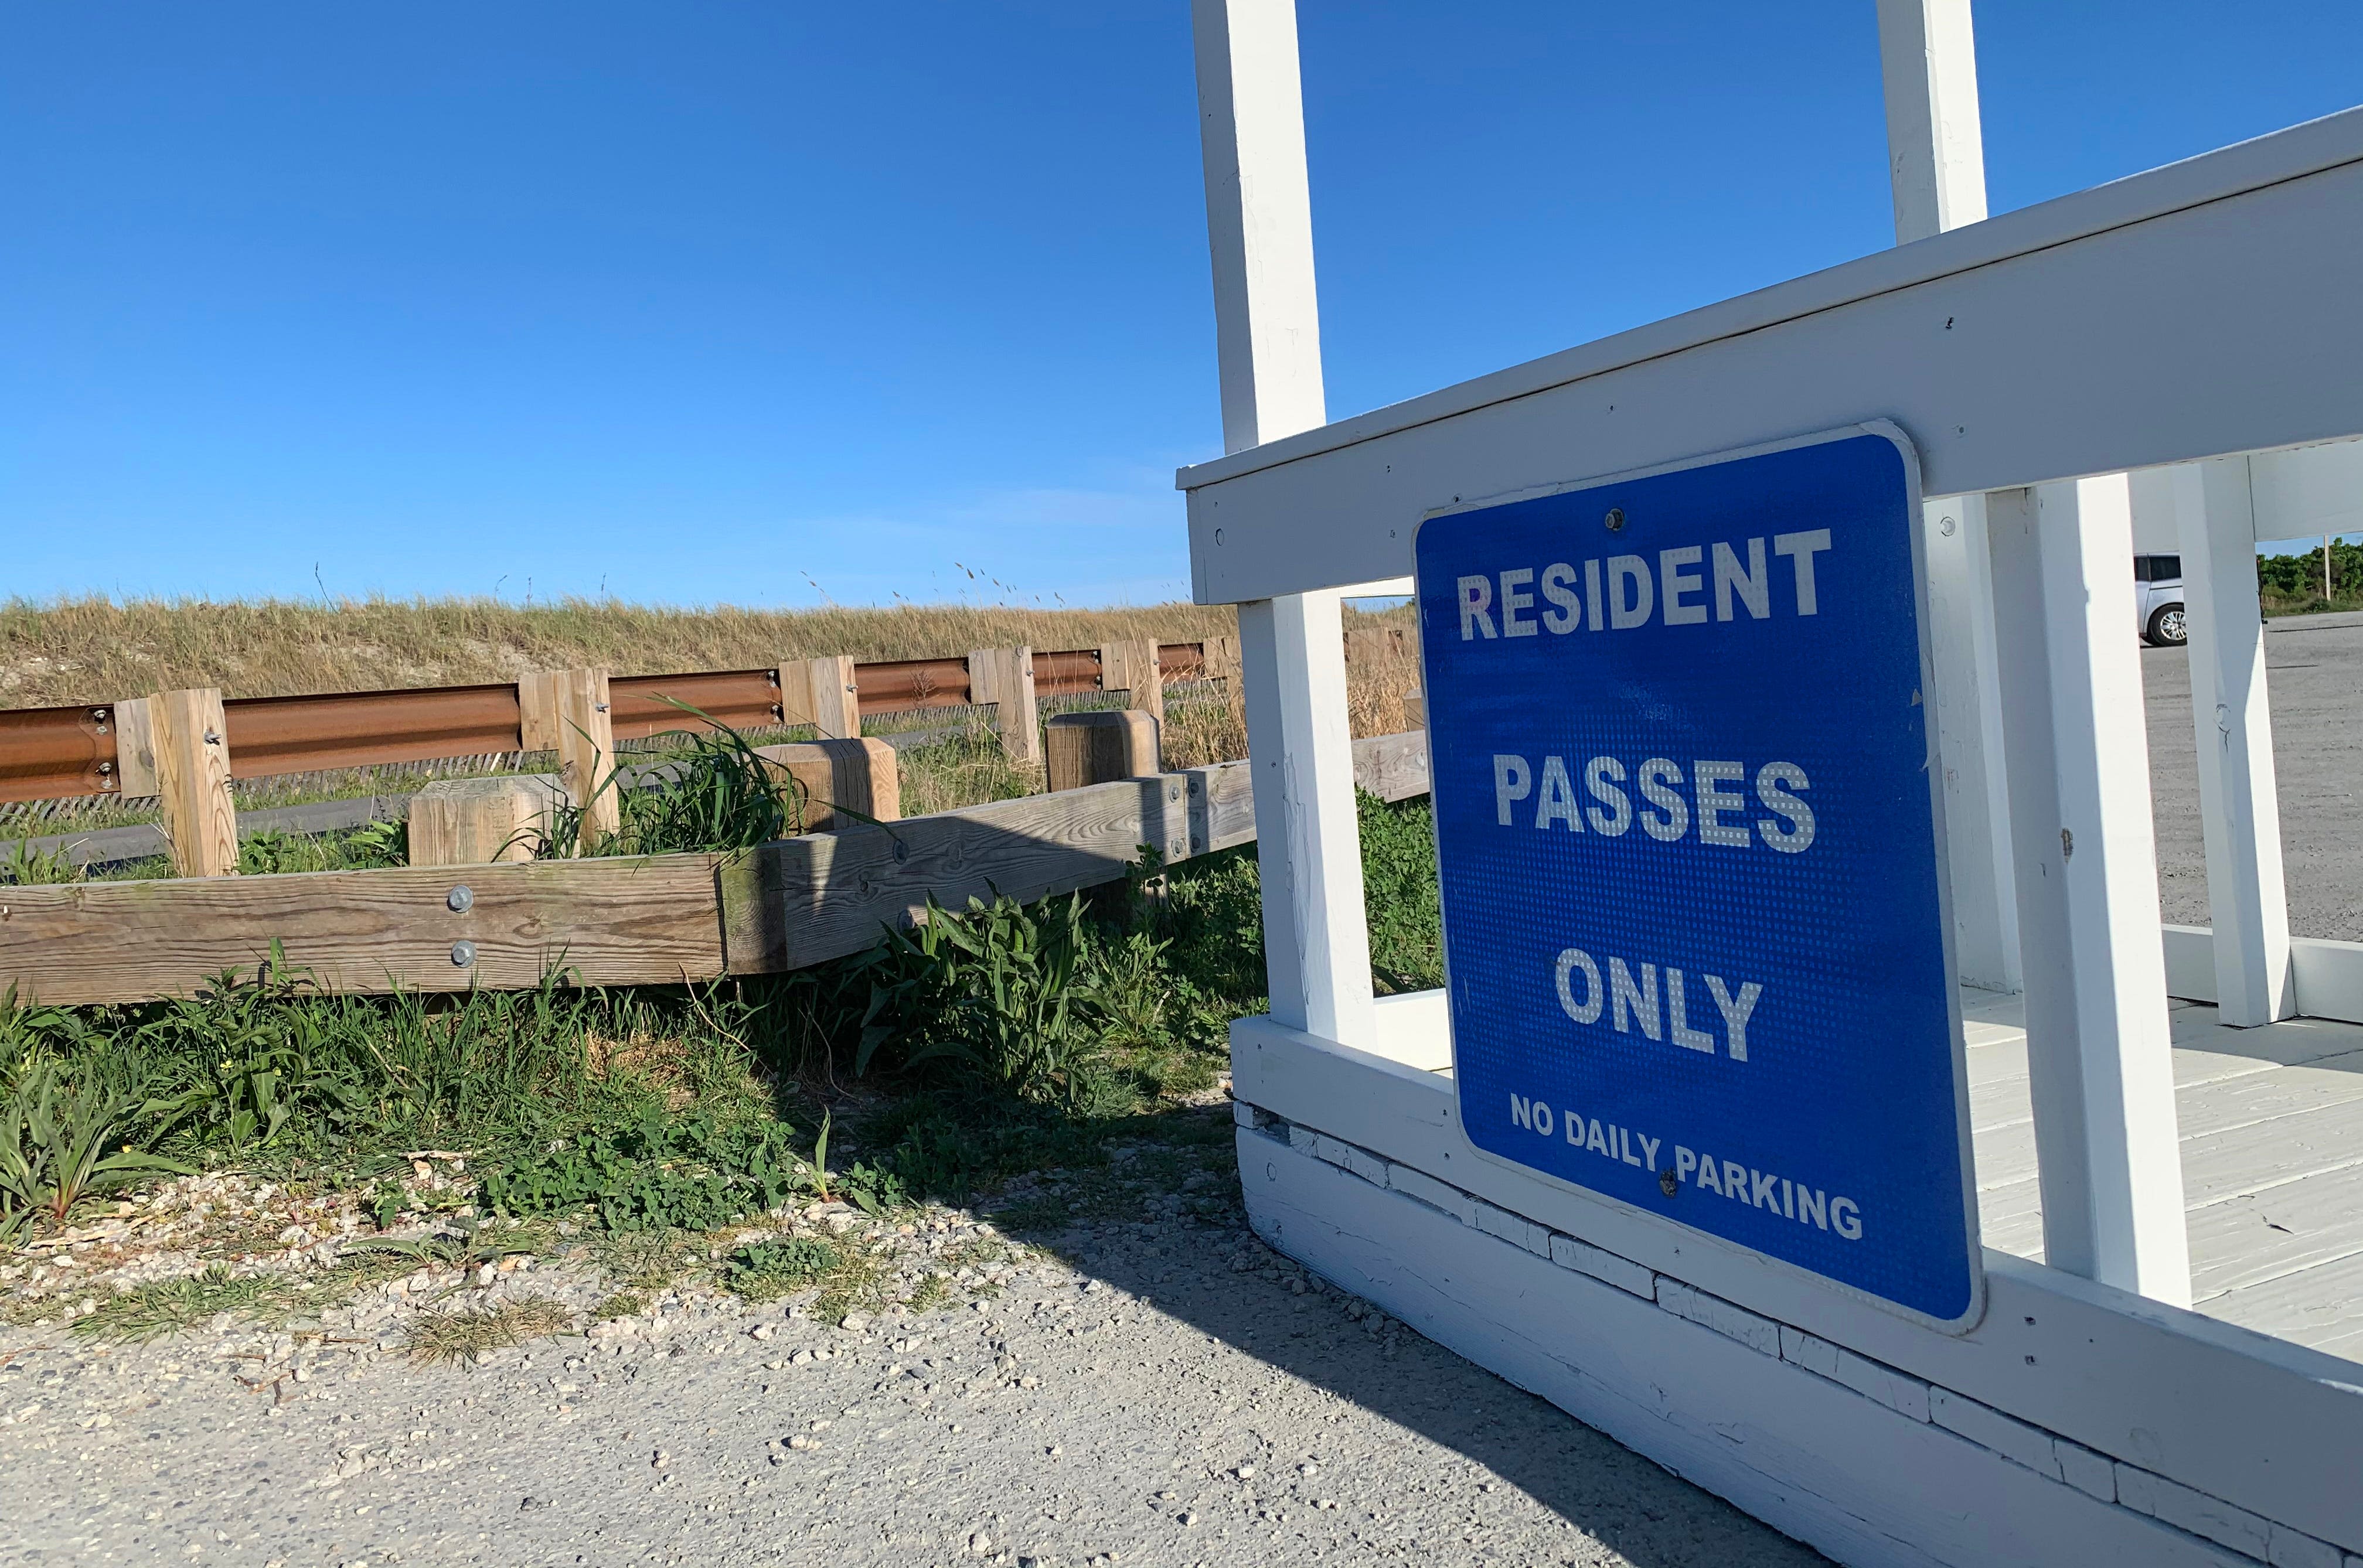 Middletown hikes up beach parking fees for first time since 2010. Why it had to be done